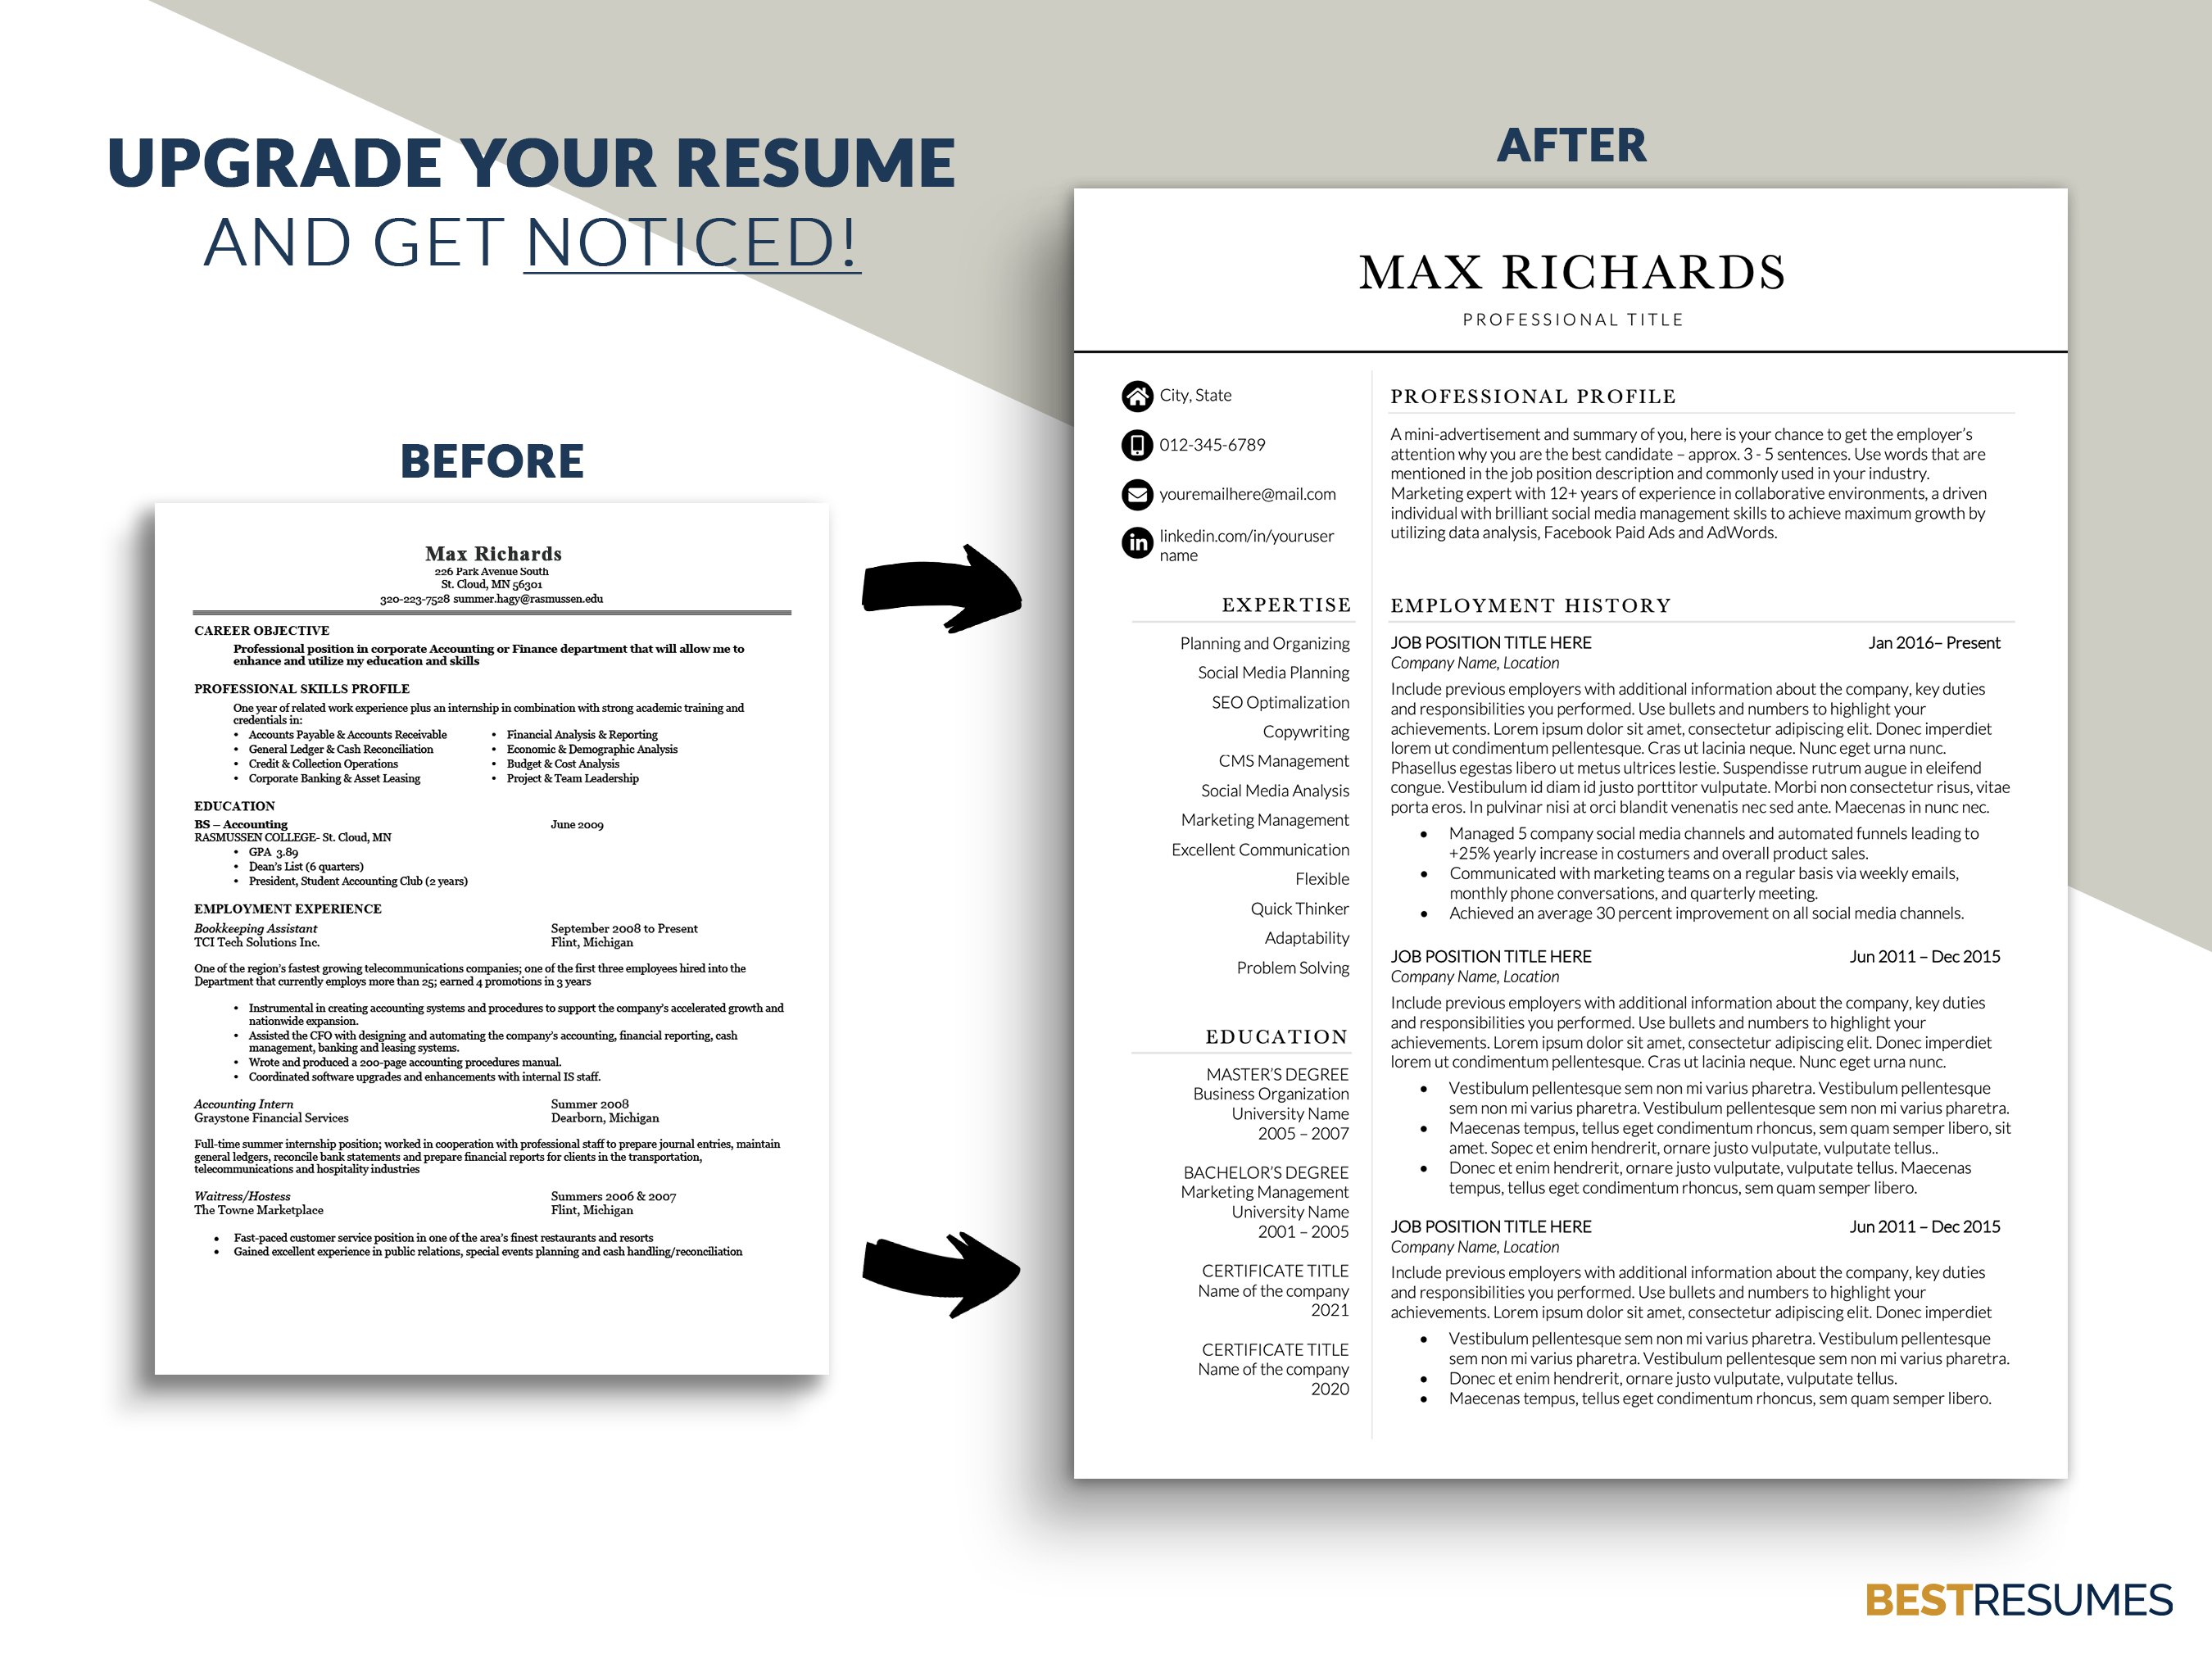 c level resume temaplate upgrade your cv resume template max richards 309